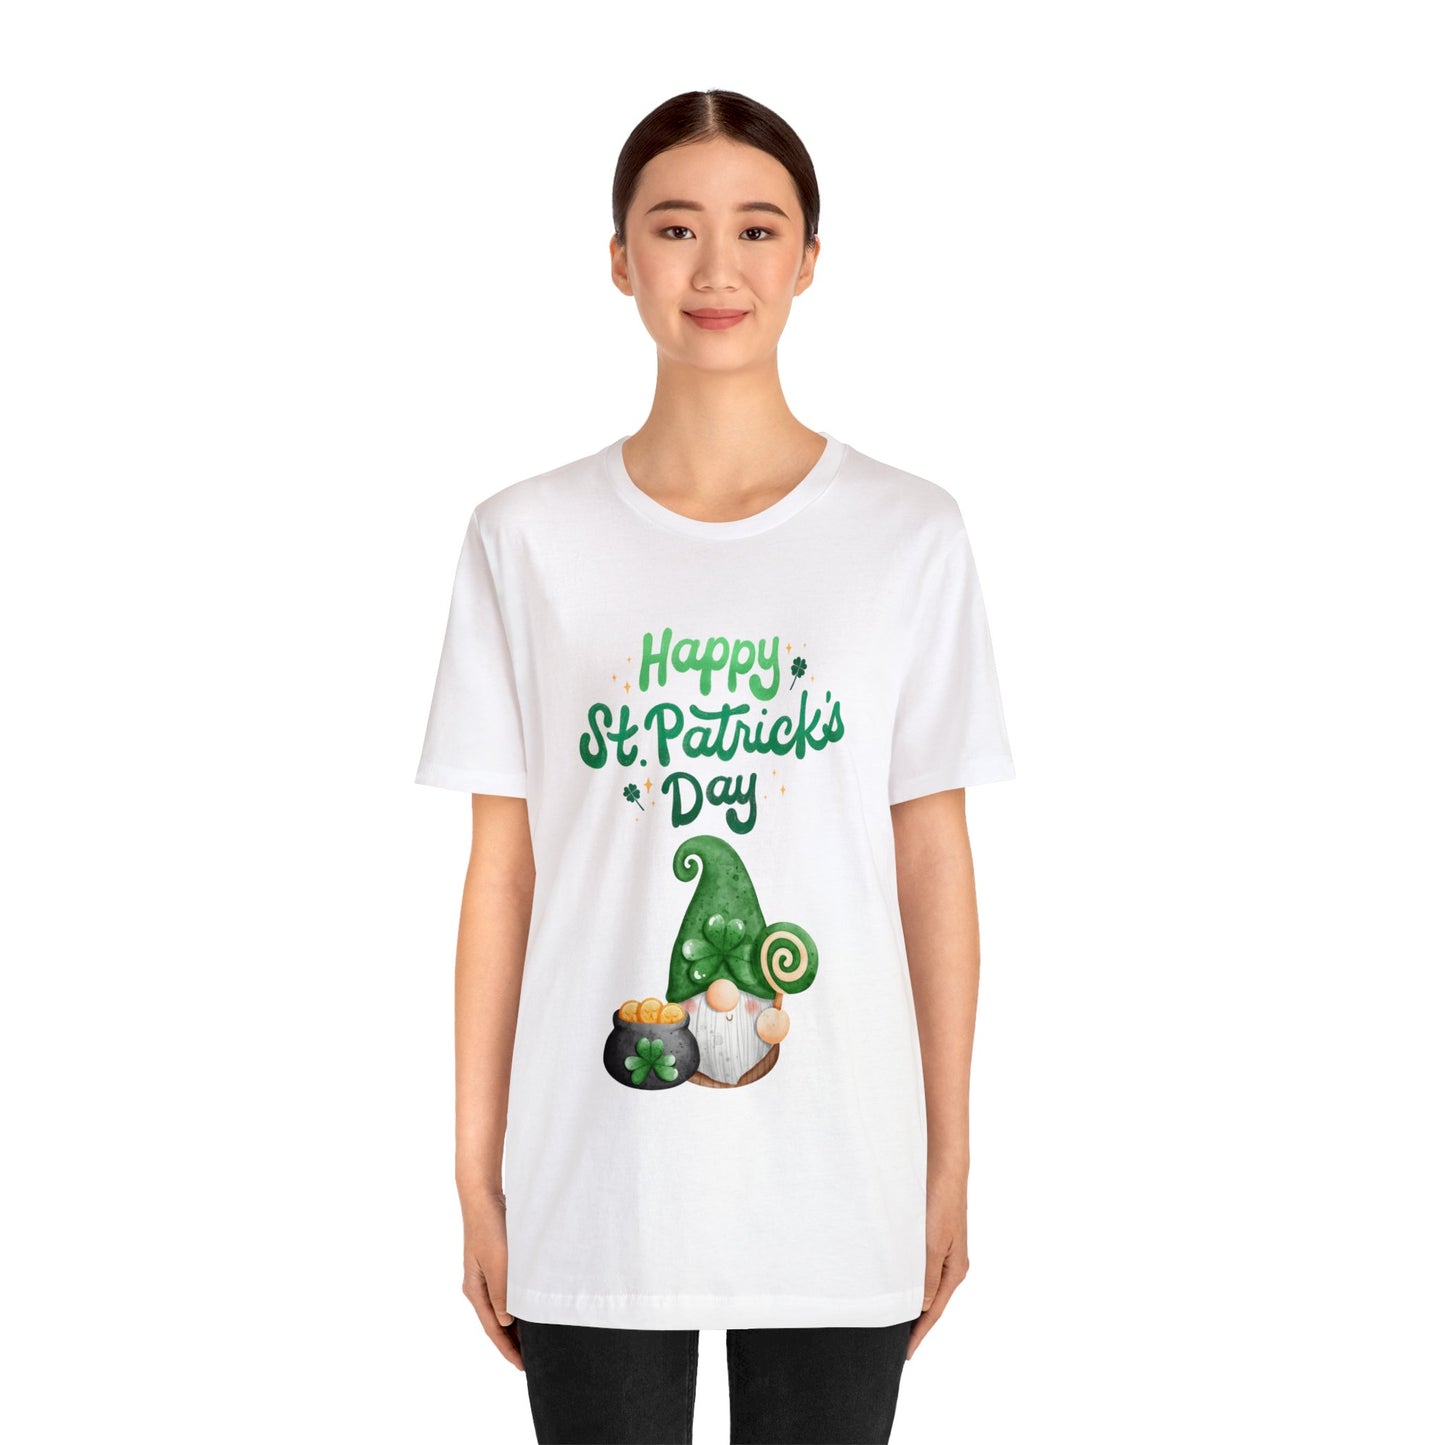 "Happy St Patrick's Day" Gnome Unisex Jersey Short Sleeve Tee, Available in White or Black, Sizes S to 3XL